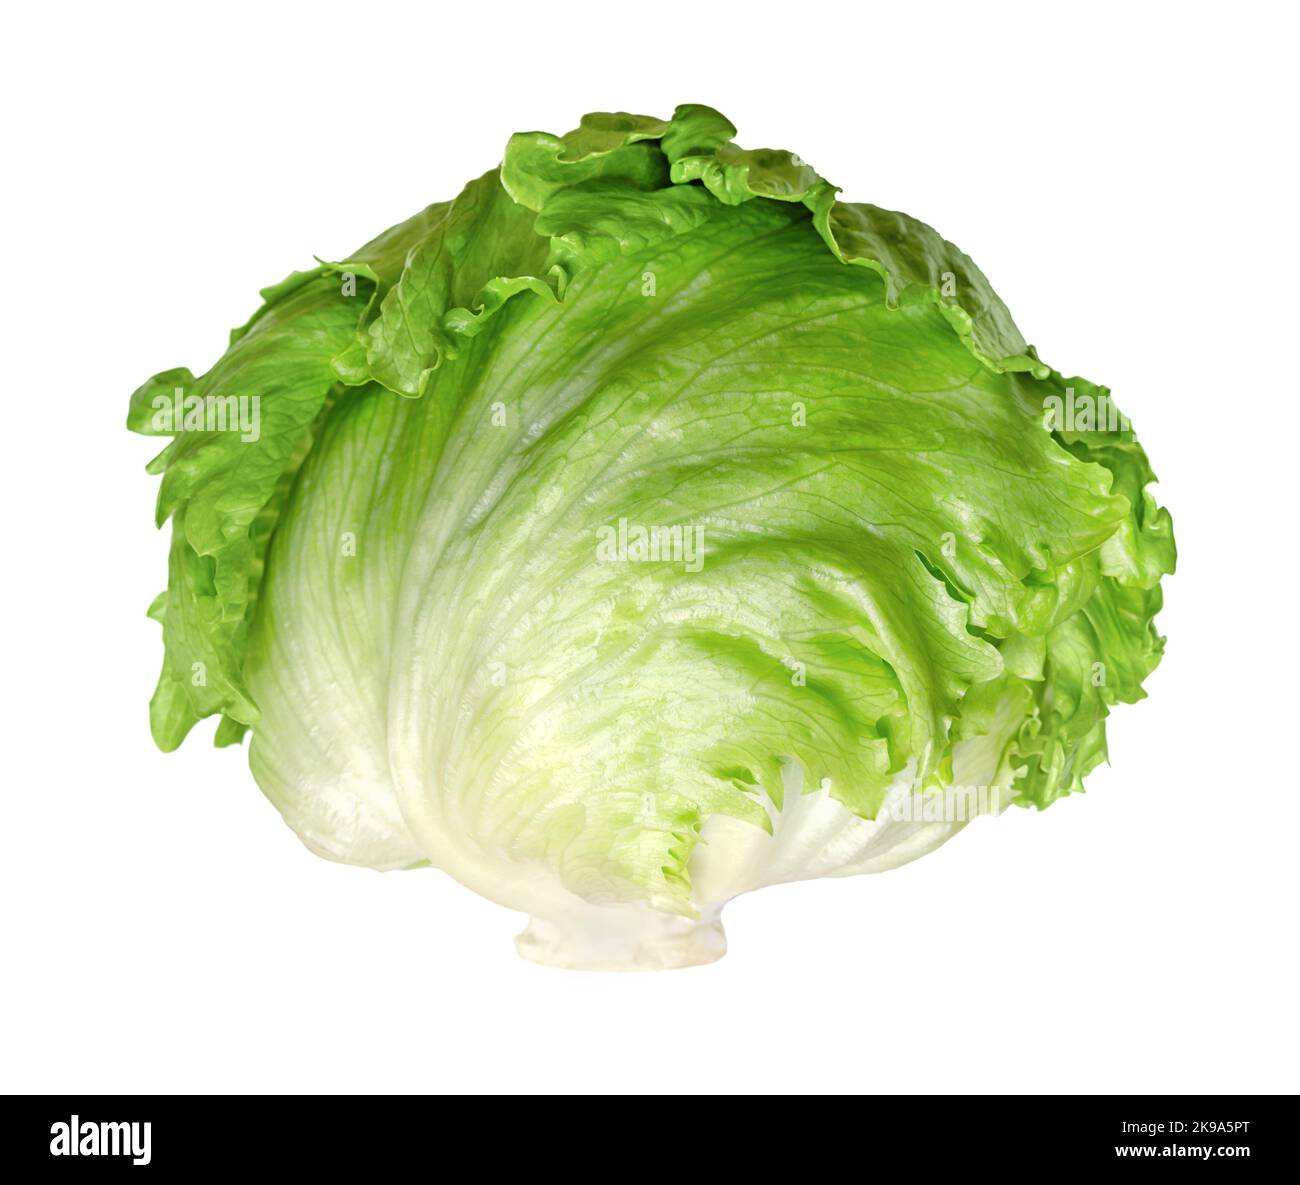 Iceberg lettuce, or crisphead, isolated, front view, on white background. Fresh, light green salad head, sometimes also called cabbage lettuce. Stock Photo